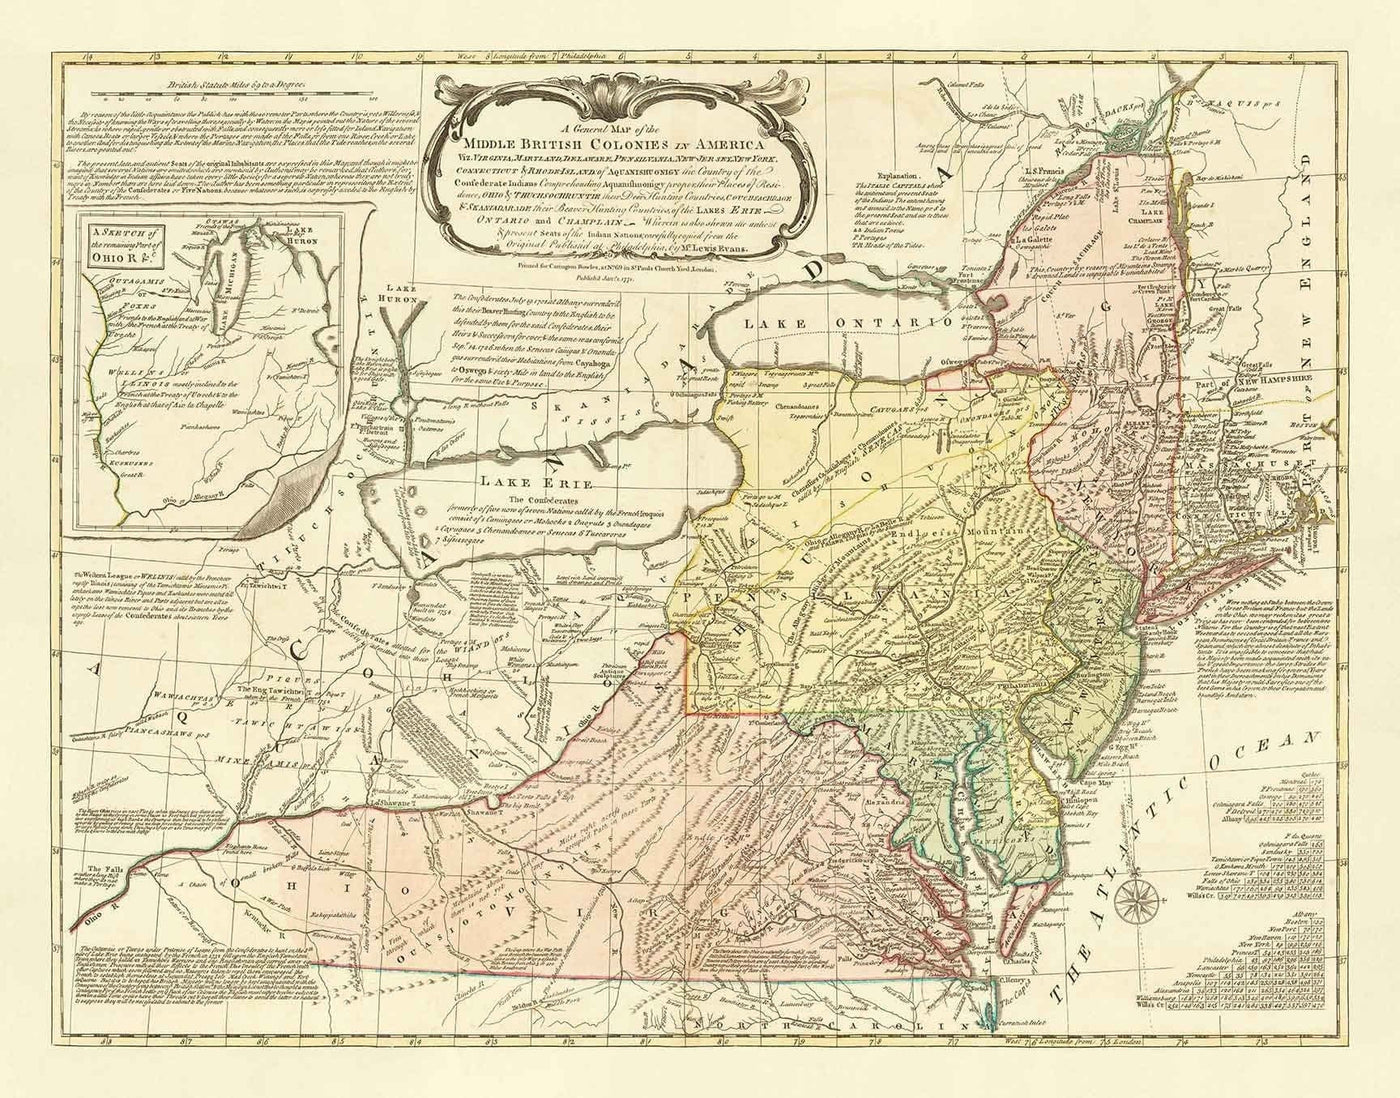 Old Map of British Colonies in America 1755 by Evans & Bowles - European and Native Settlements, Pre-Independence USA